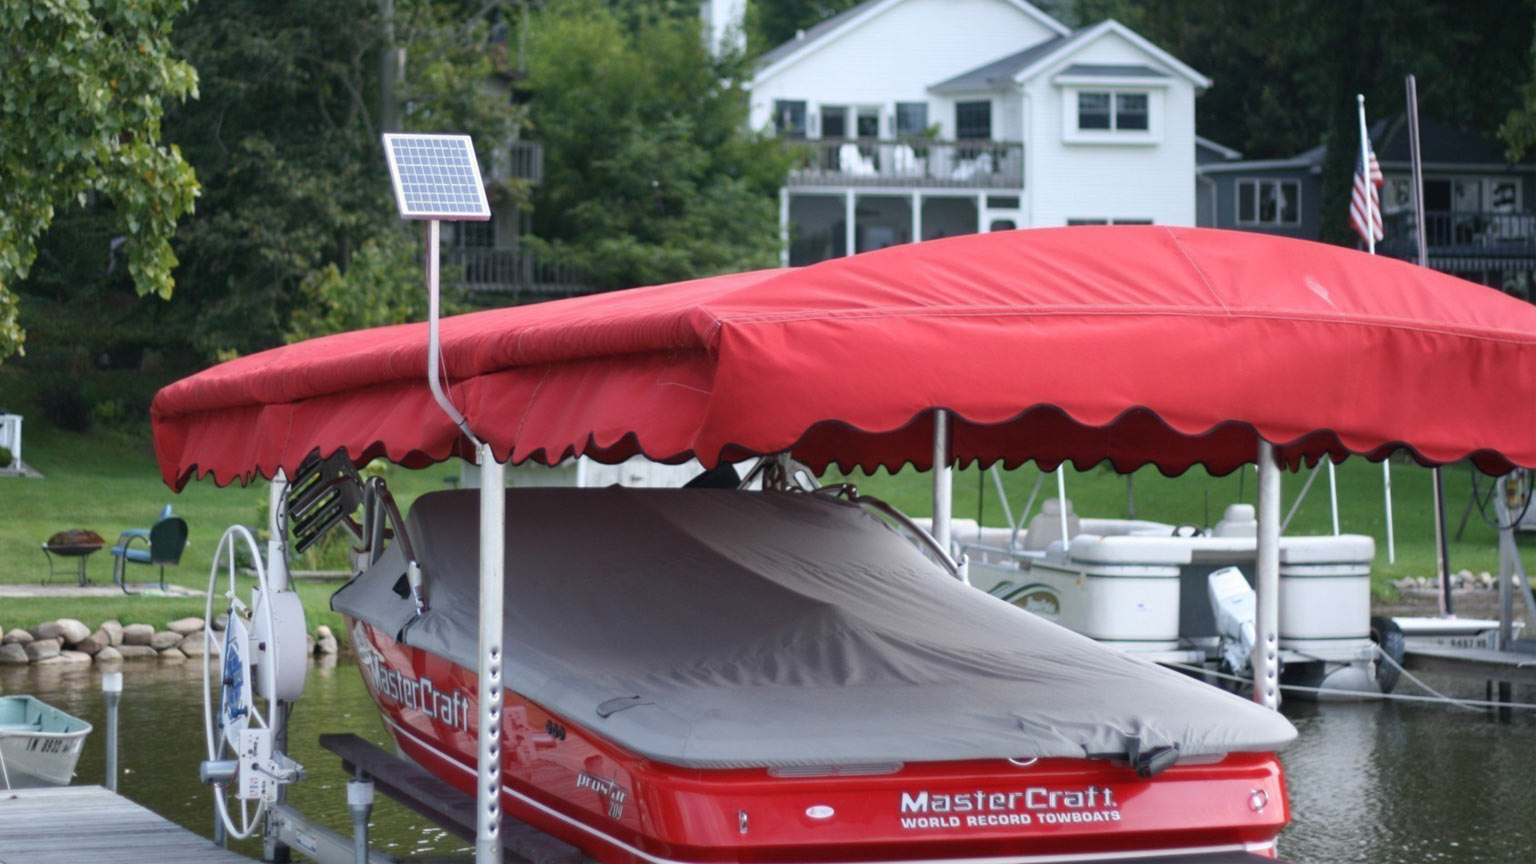 mastercraft under red canopy with 12v solar charging kit for boat lift